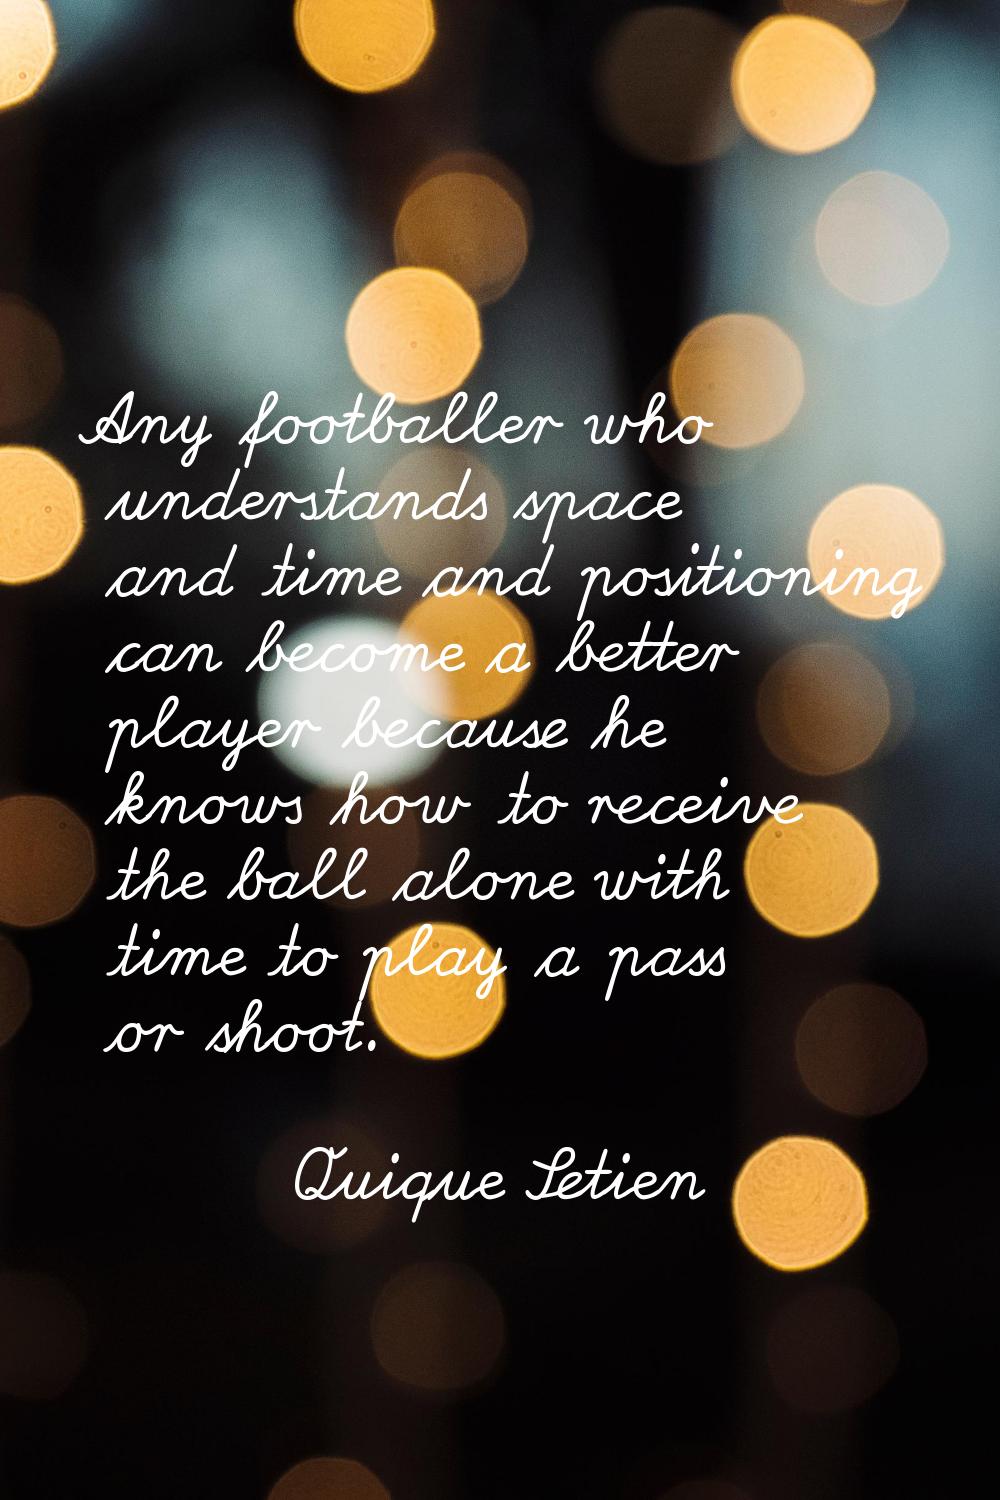 Any footballer who understands space and time and positioning can become a better player because he